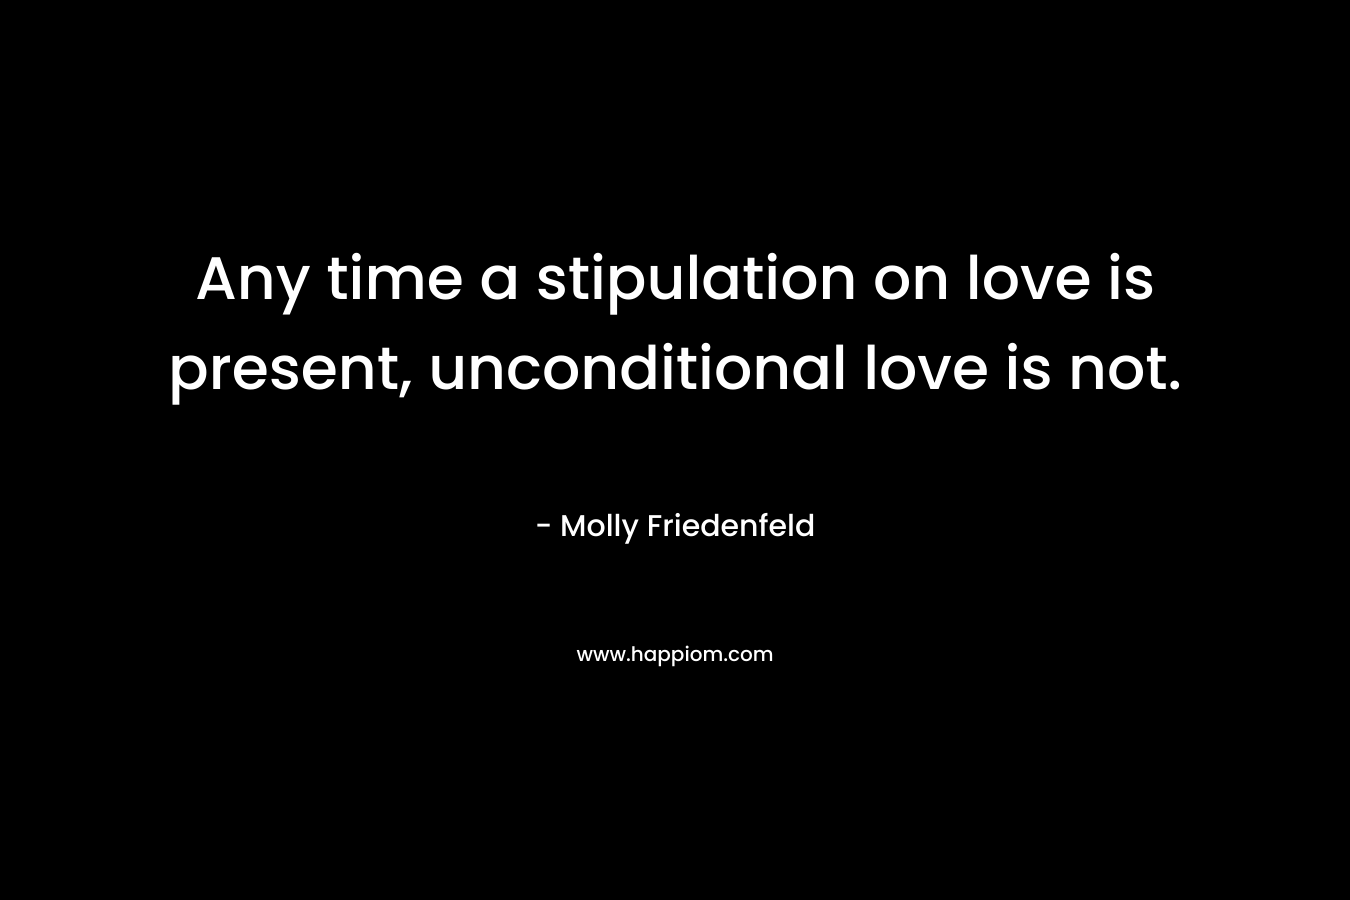 Any time a stipulation on love is present, unconditional love is not. – Molly Friedenfeld